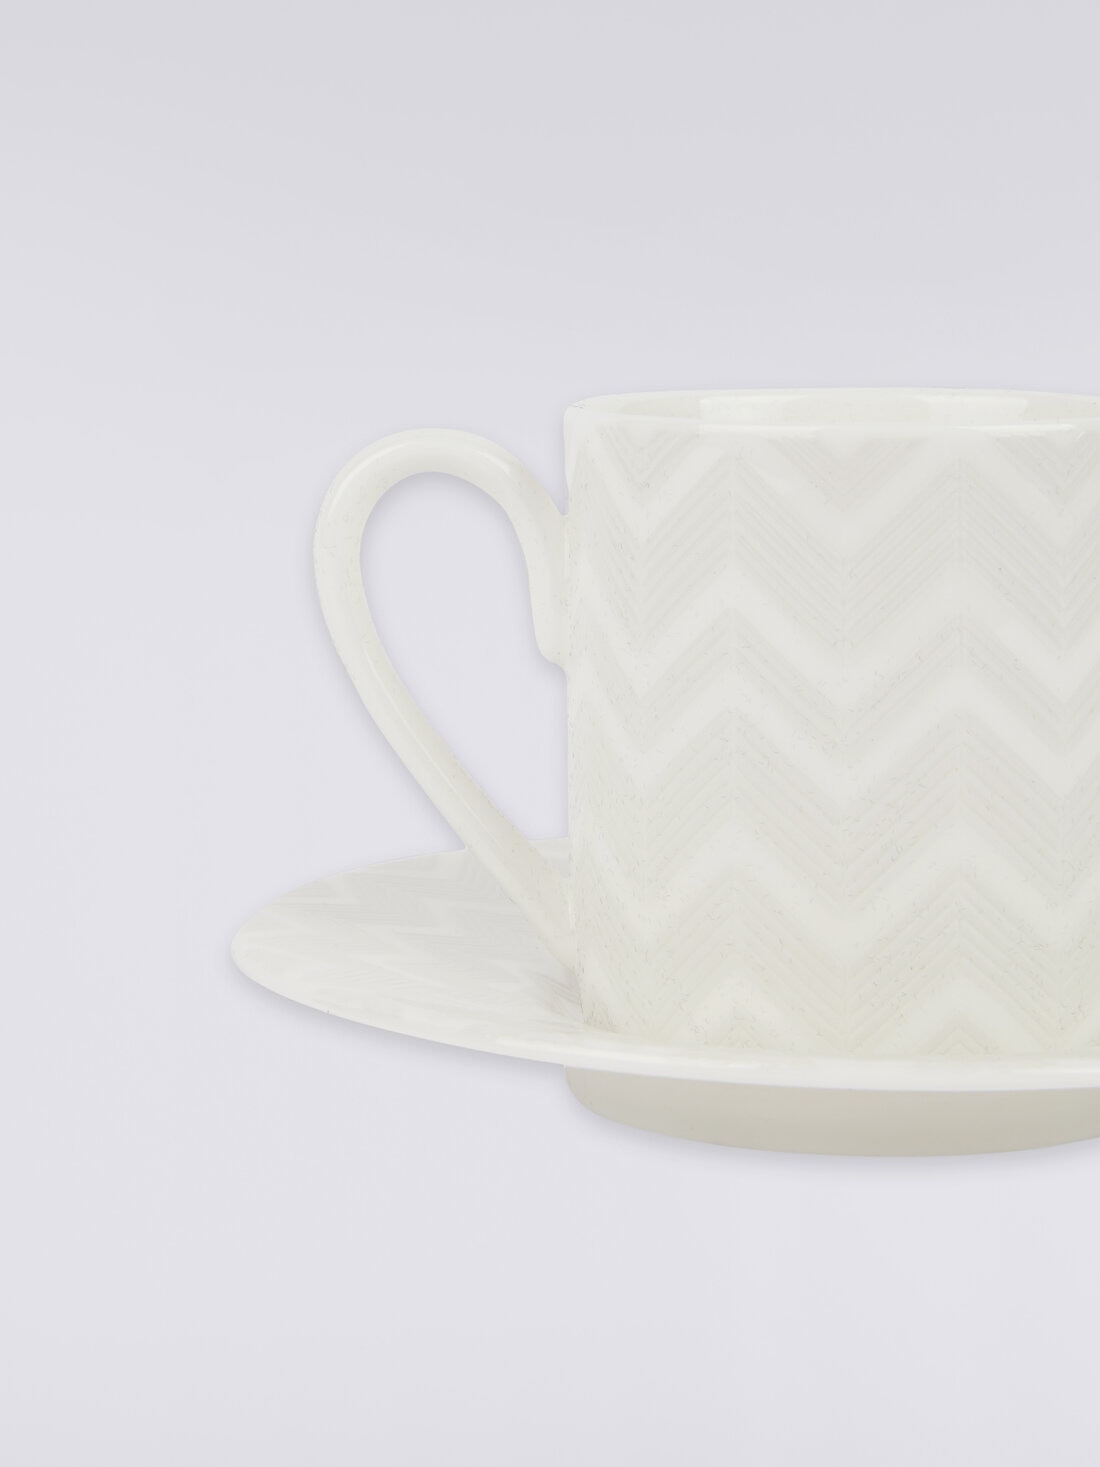 Zigzag White Set of 2 coffee cups & saucers, White  - 8051575779169 - 1